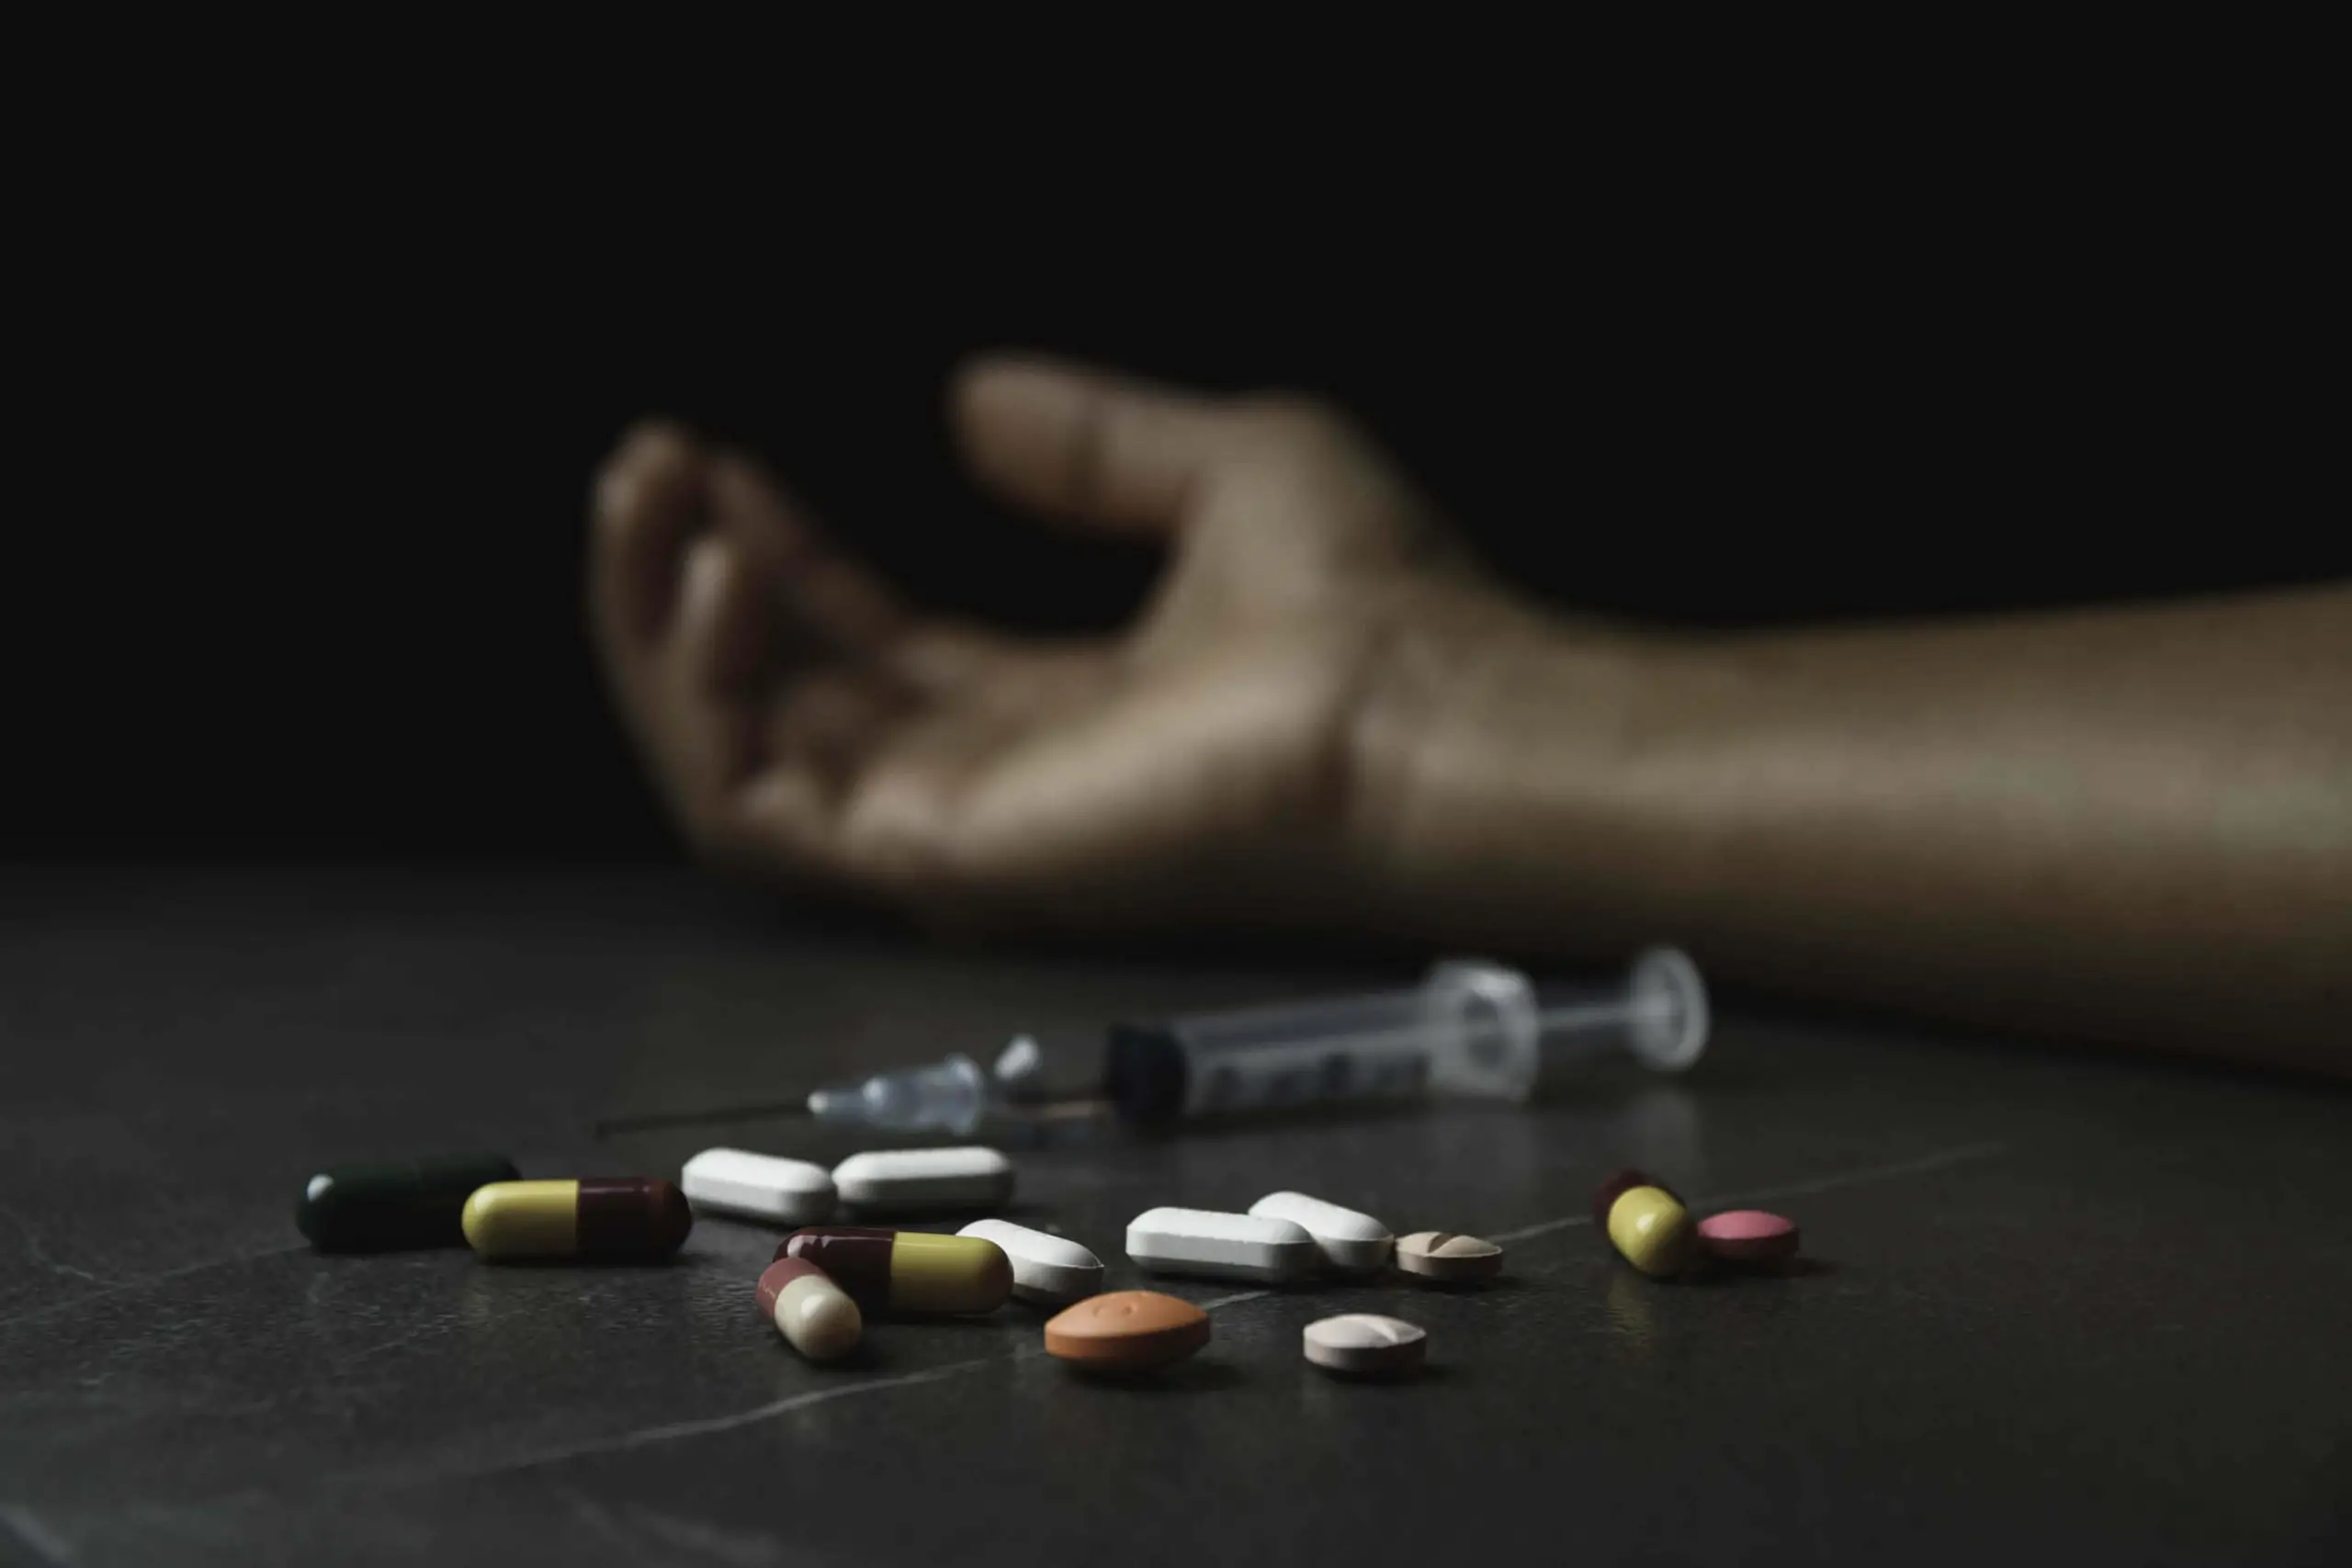 How Does a Drug Overdose Kill You?